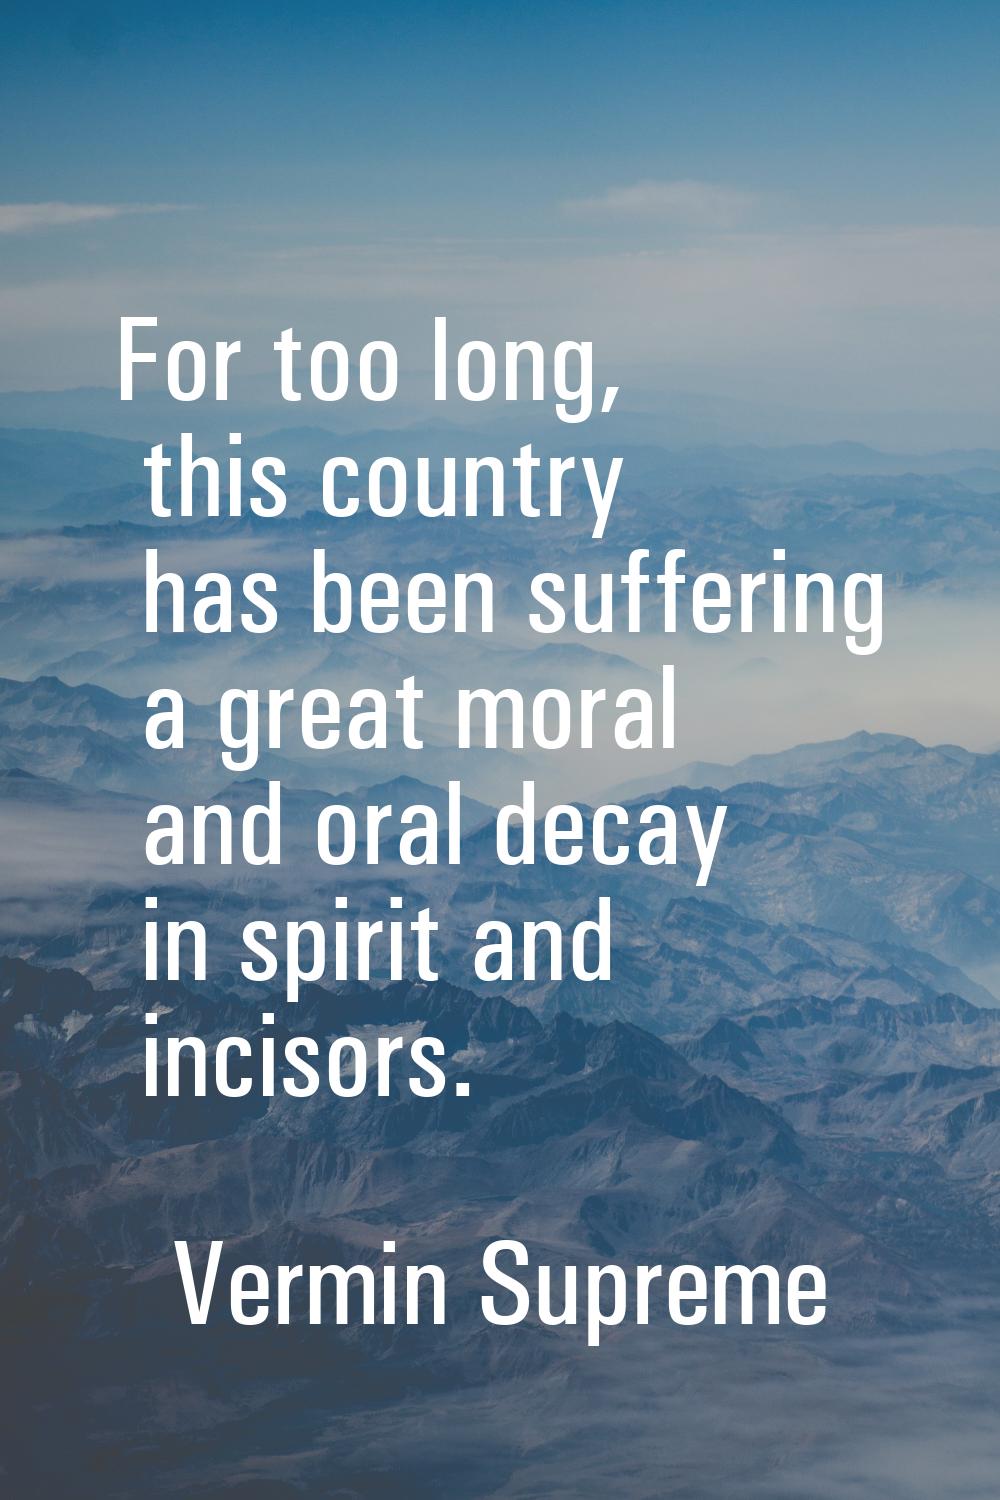 For too long, this country has been suffering a great moral and oral decay in spirit and incisors.